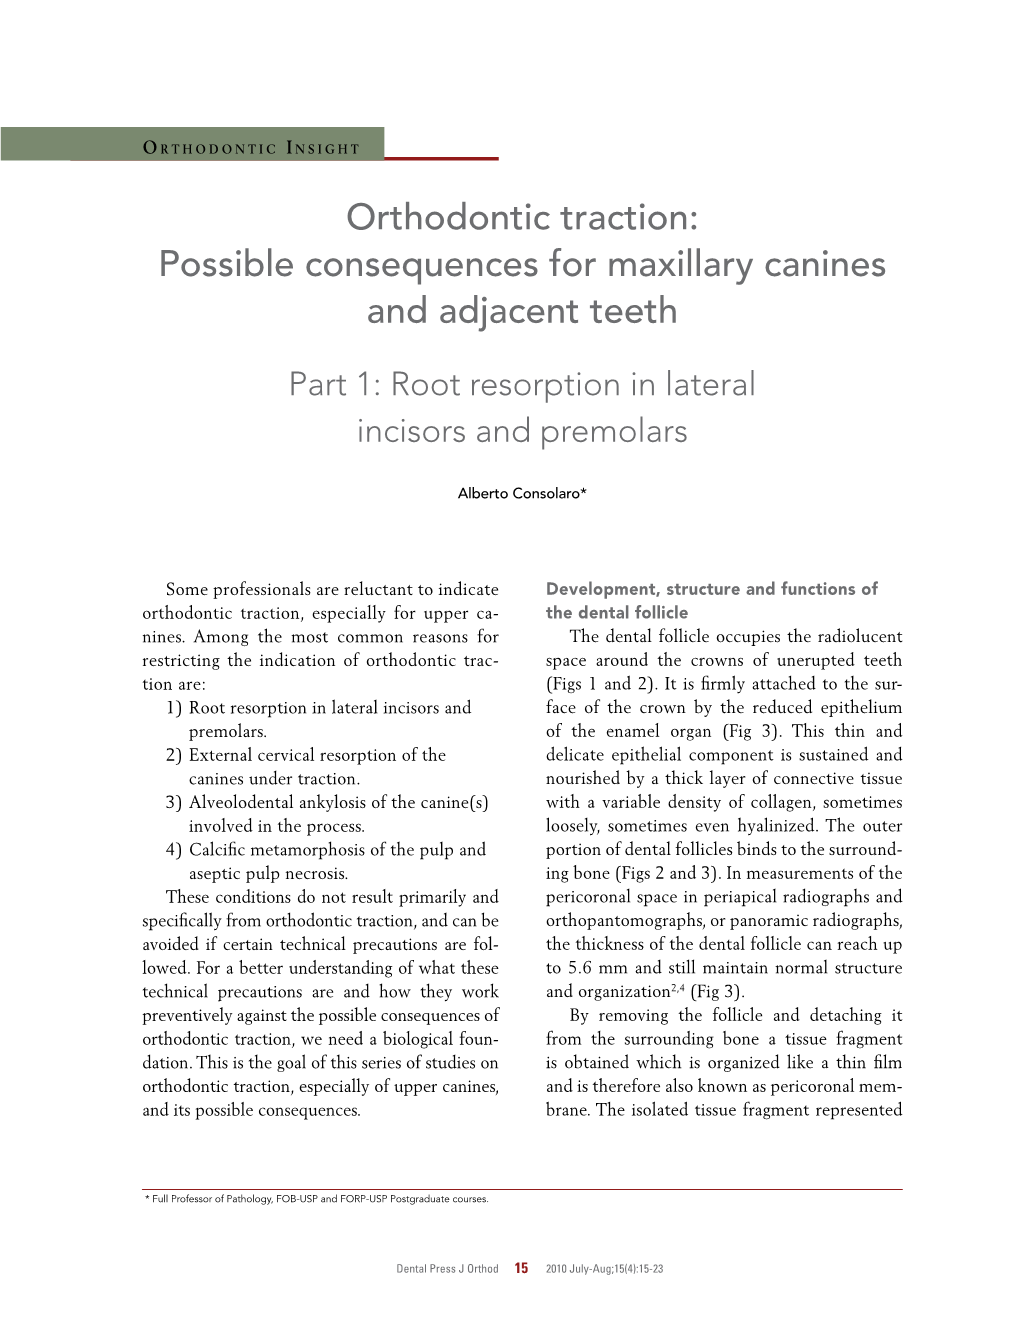 Orthodontic Traction: Possible Consequences for Maxillary Canines and Adjacent Teeth